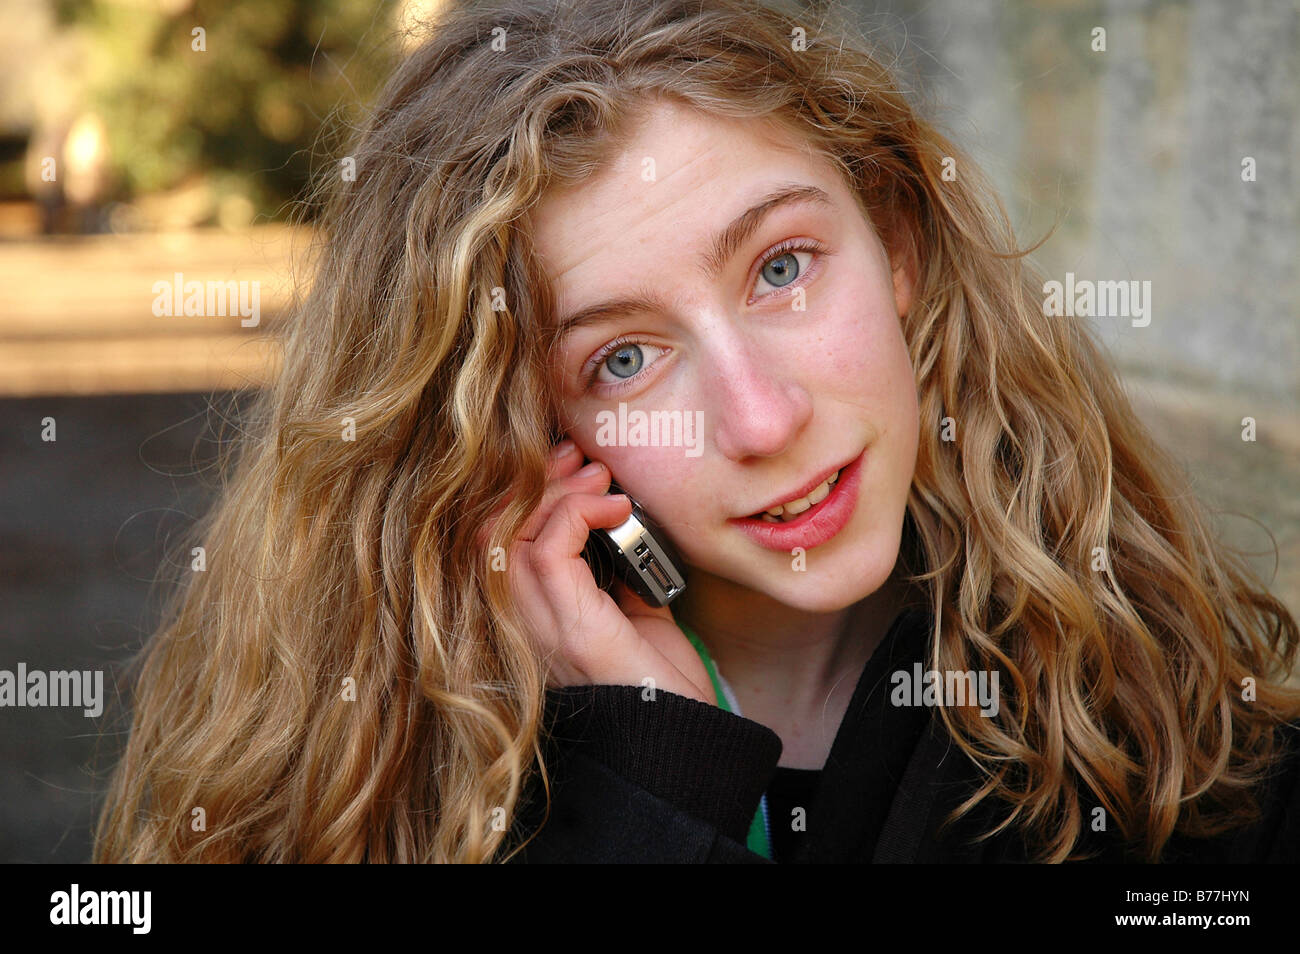 close up portrait of girl on mobile phone Stock Photo